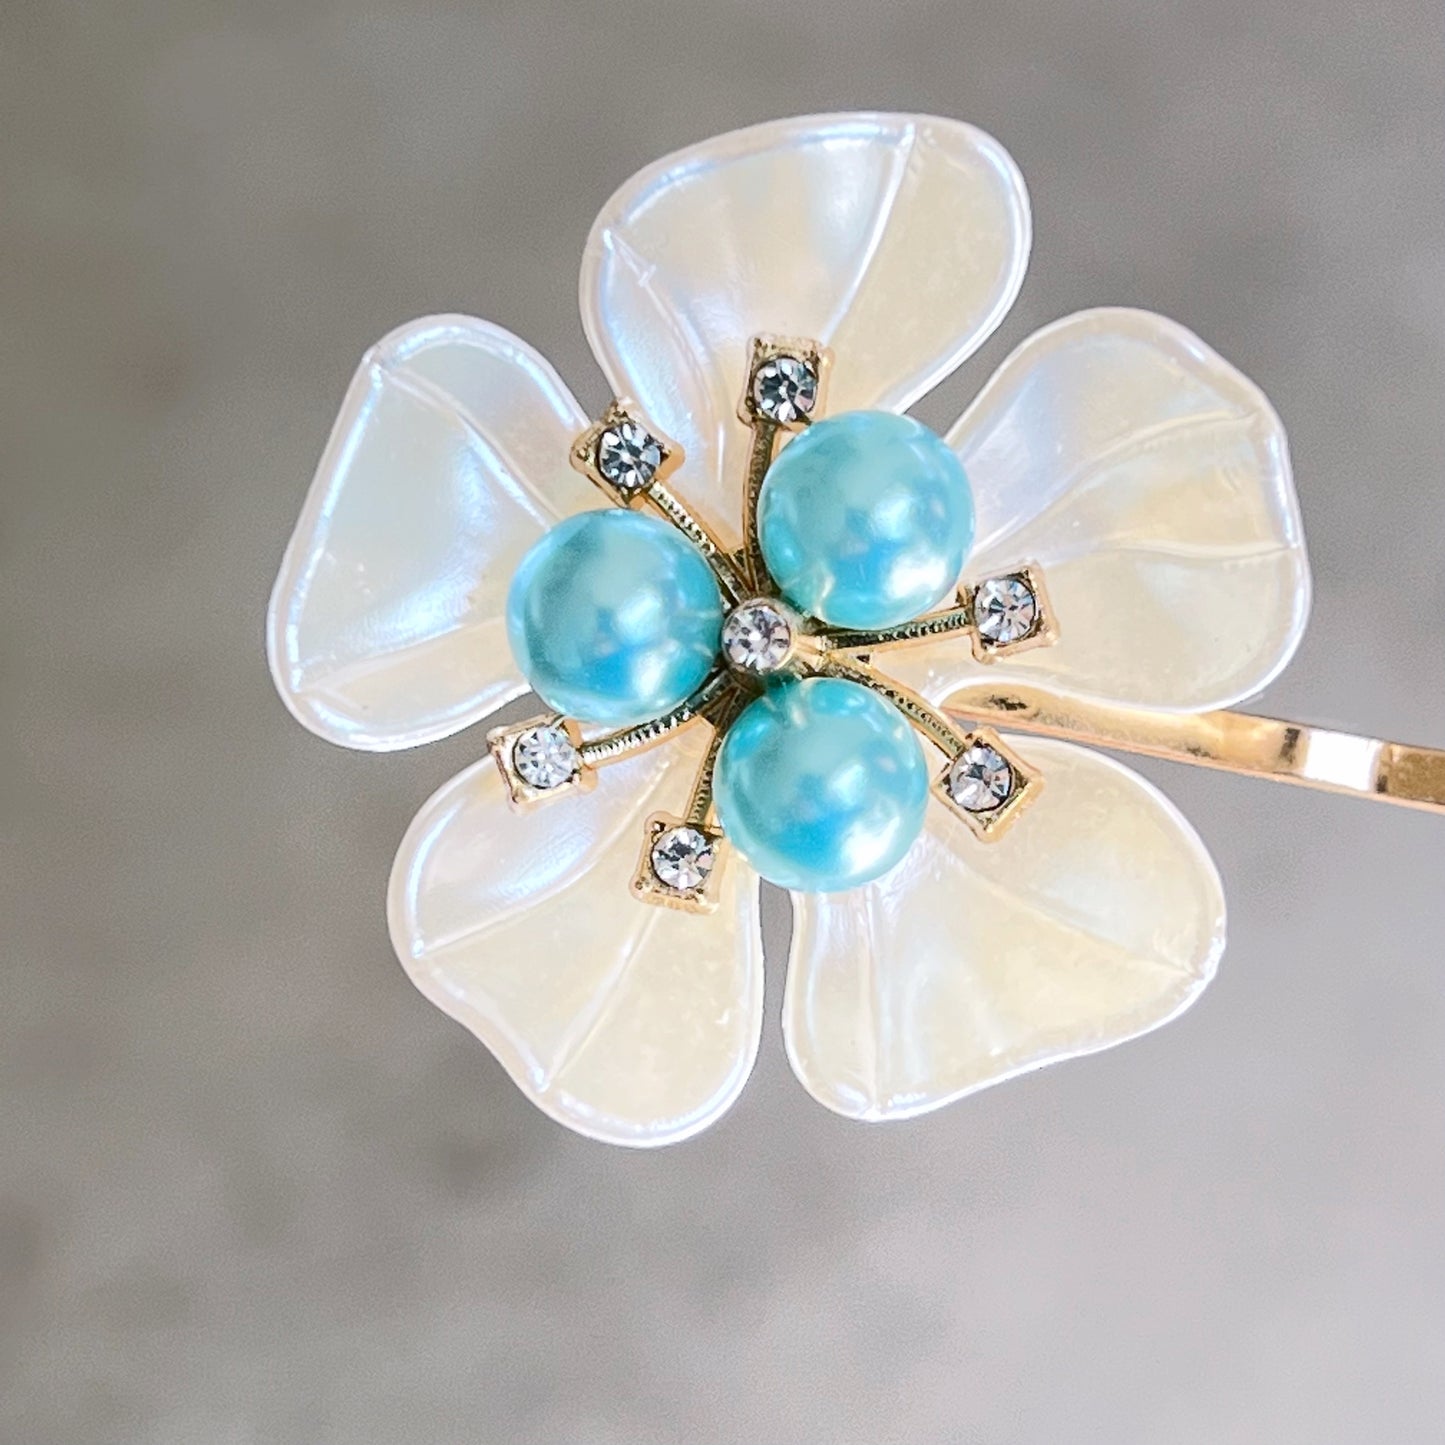 Blue Pearl Hair Pins Set - Wedding Hair Jewelry for Bride | White Floral & Rhinestone Bobby Pins for Elegant Hairstyles